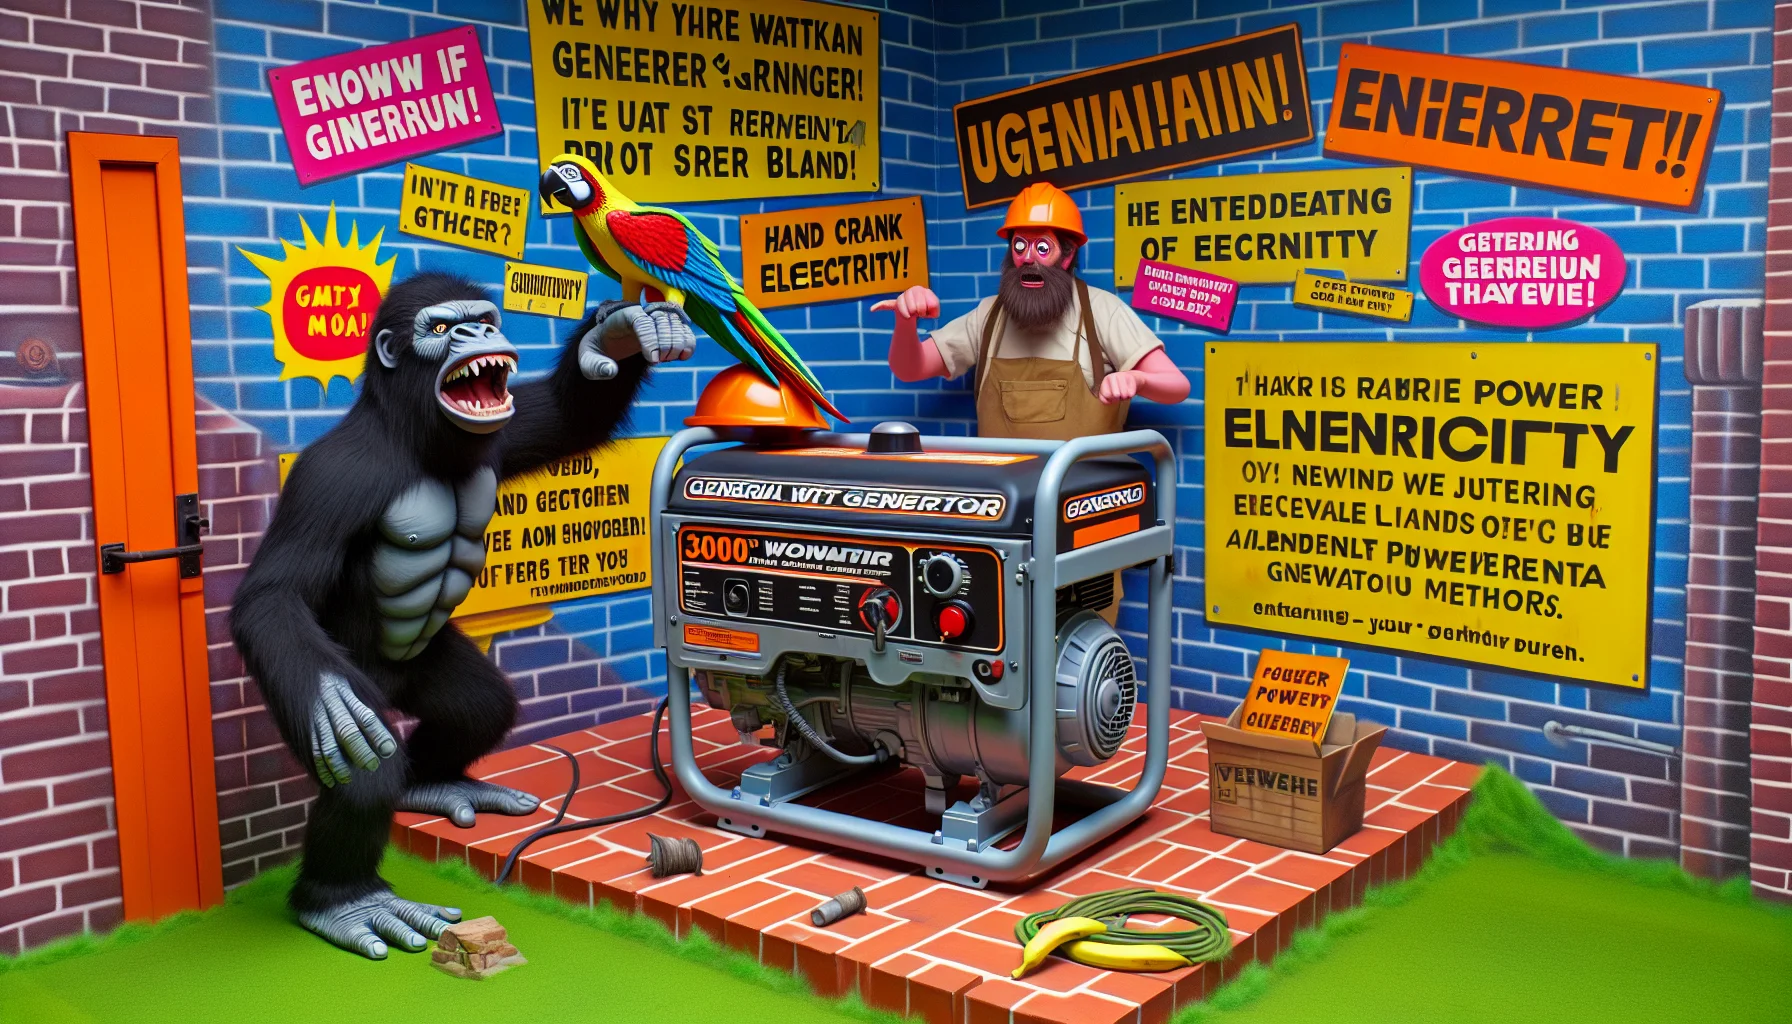 Visualize a humorous and eye-catching scene featuring a generic 3000 watt generator which resembles a product from an unnamed popular brand. The generator is situated in a vivid, quirky setup that overflows the mundane. Imagine, on one side, a man in a gorilla costume, ostentatiously trying to hand crank the generator, while on the other, a parrot perched on the generator, absurdly wearing a hard hat. The given scenery is doused in signs encouraging the use of generators, catchy lines about the power of electricity, and jesting phrases related to alternative power generation methods. The objective is to drive interest in power generators and symbolize the potential of independently generated electricity.